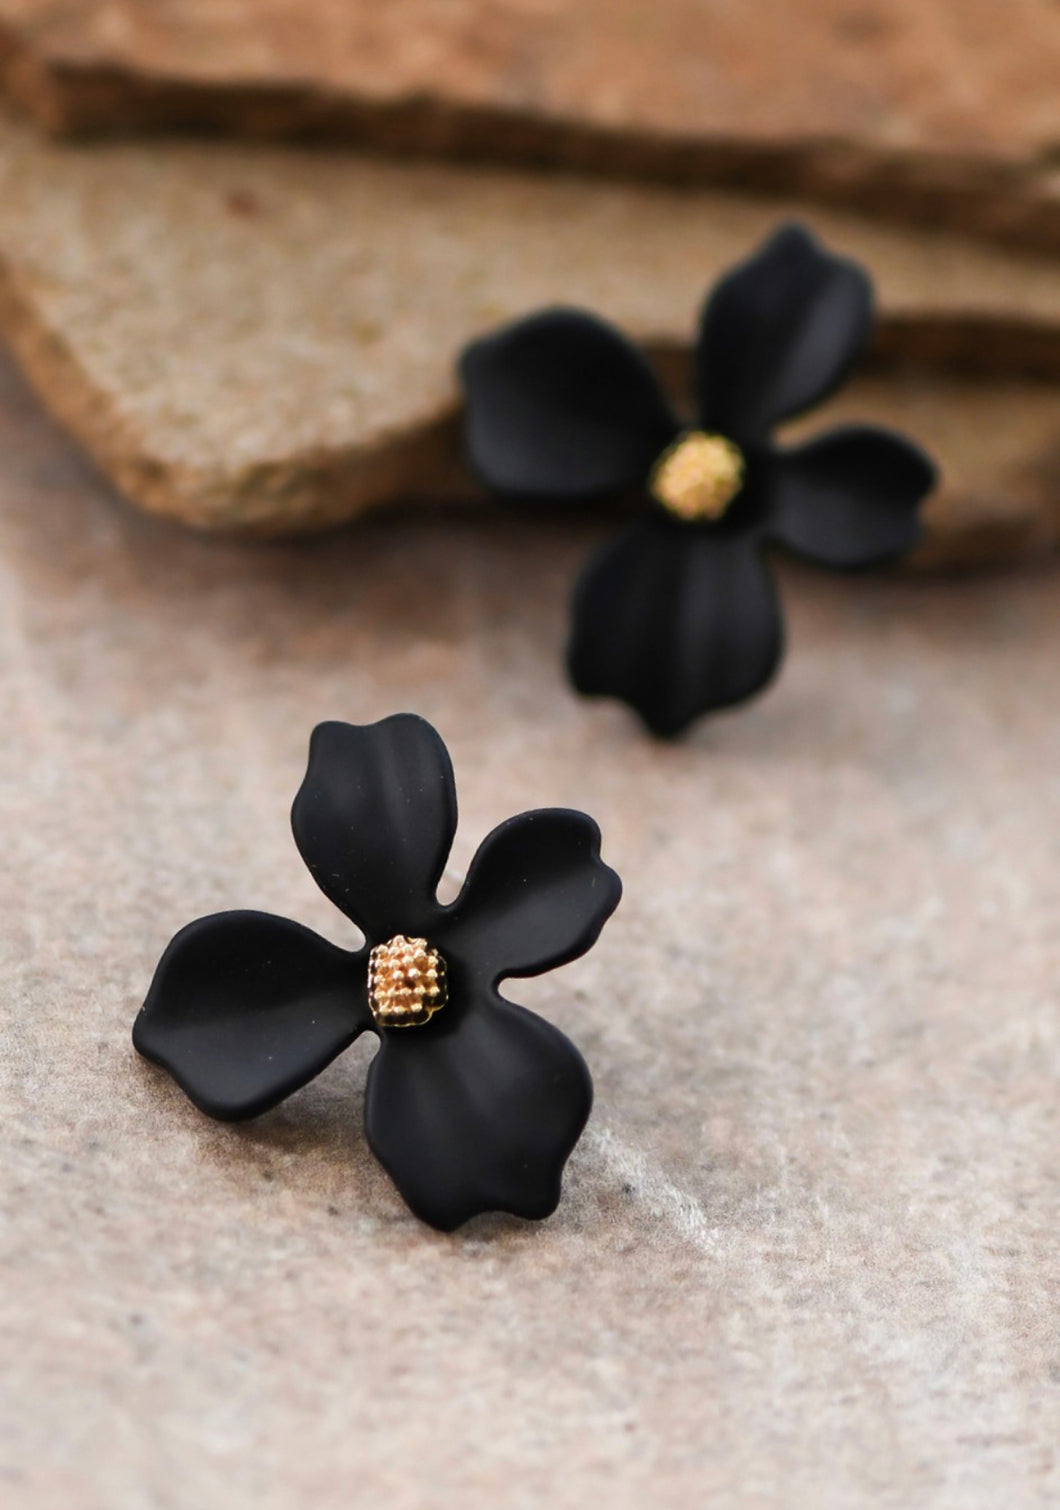 Painted Metal Flower Stud Earrings - More Colors Available